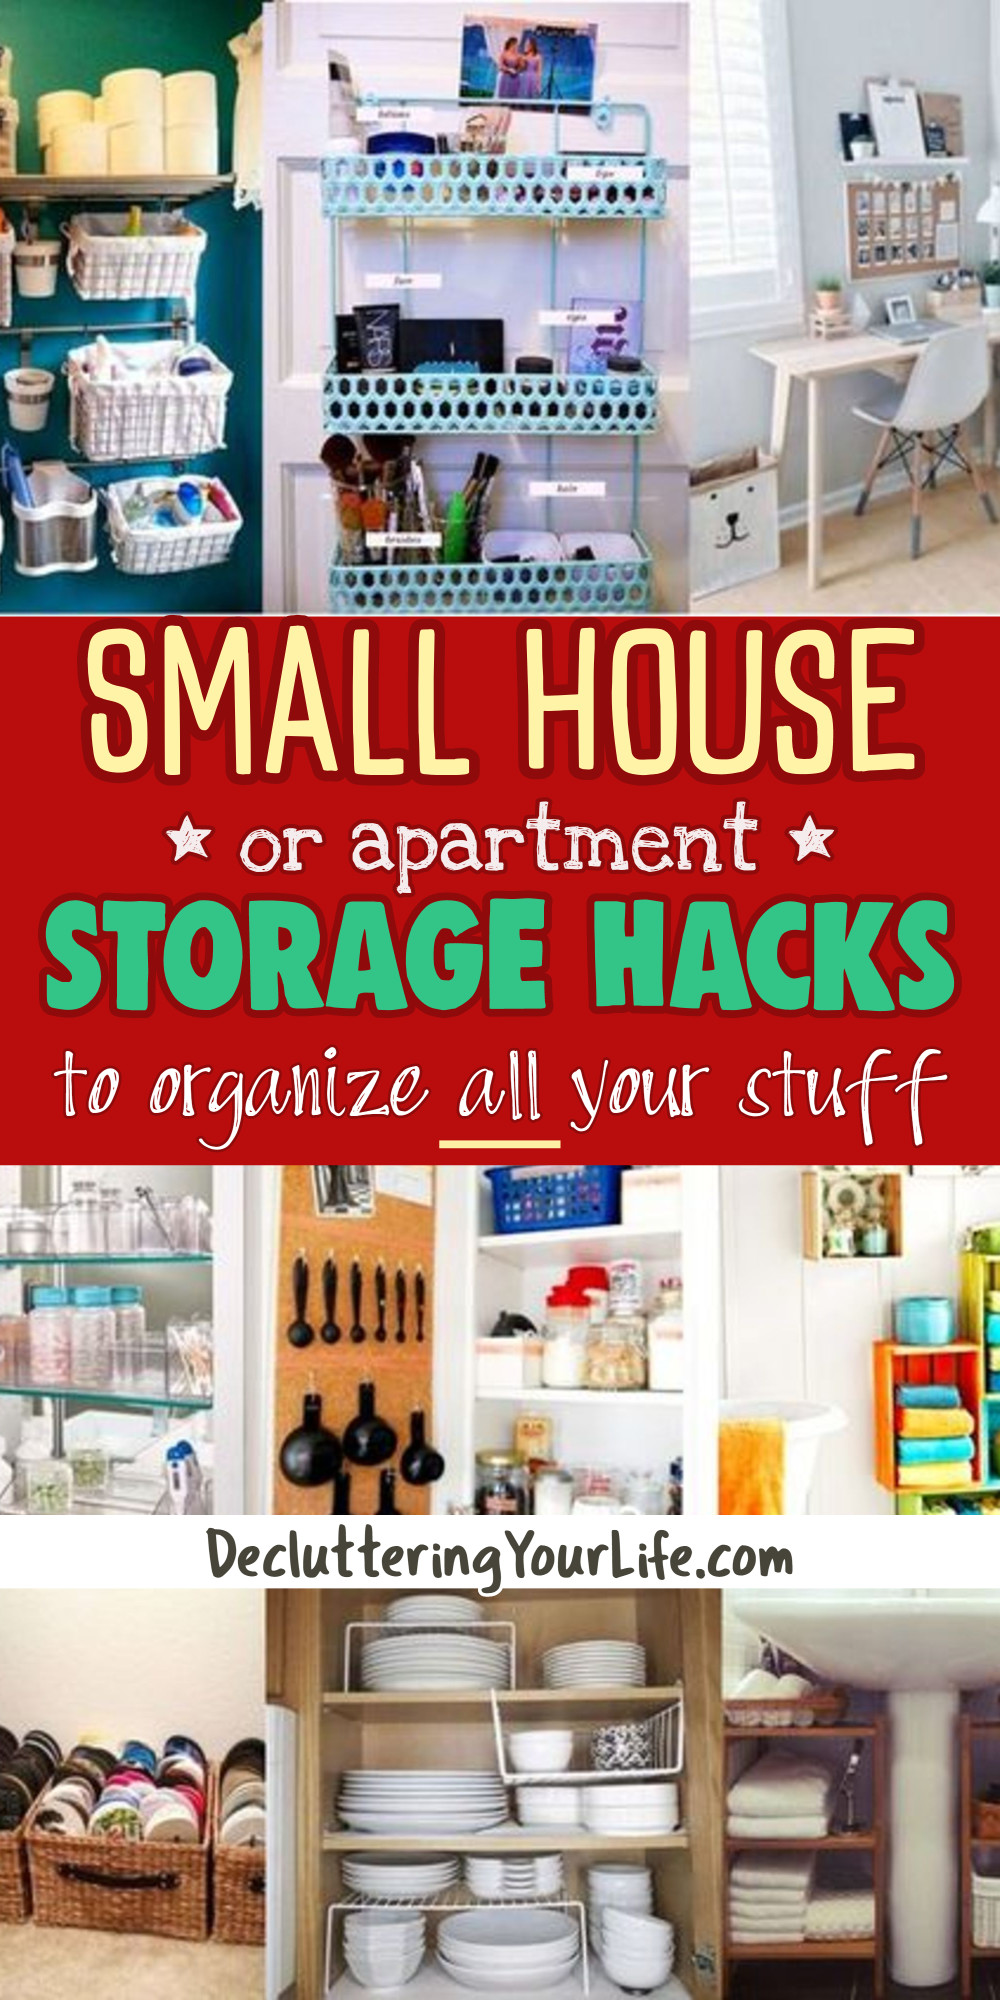 Small House Storage Solutions and Clutter Control Inspiration - Tips from professional organizers: organizing ideas, declutter and organize and decluttering ideas when feeling overwhelmed, how to organize your home, get organized at home, storage and organization ideas for the home, getting organized help, tips and tricks plus home organization hacks from Decluttering Your Life  - Let's Get Organized!